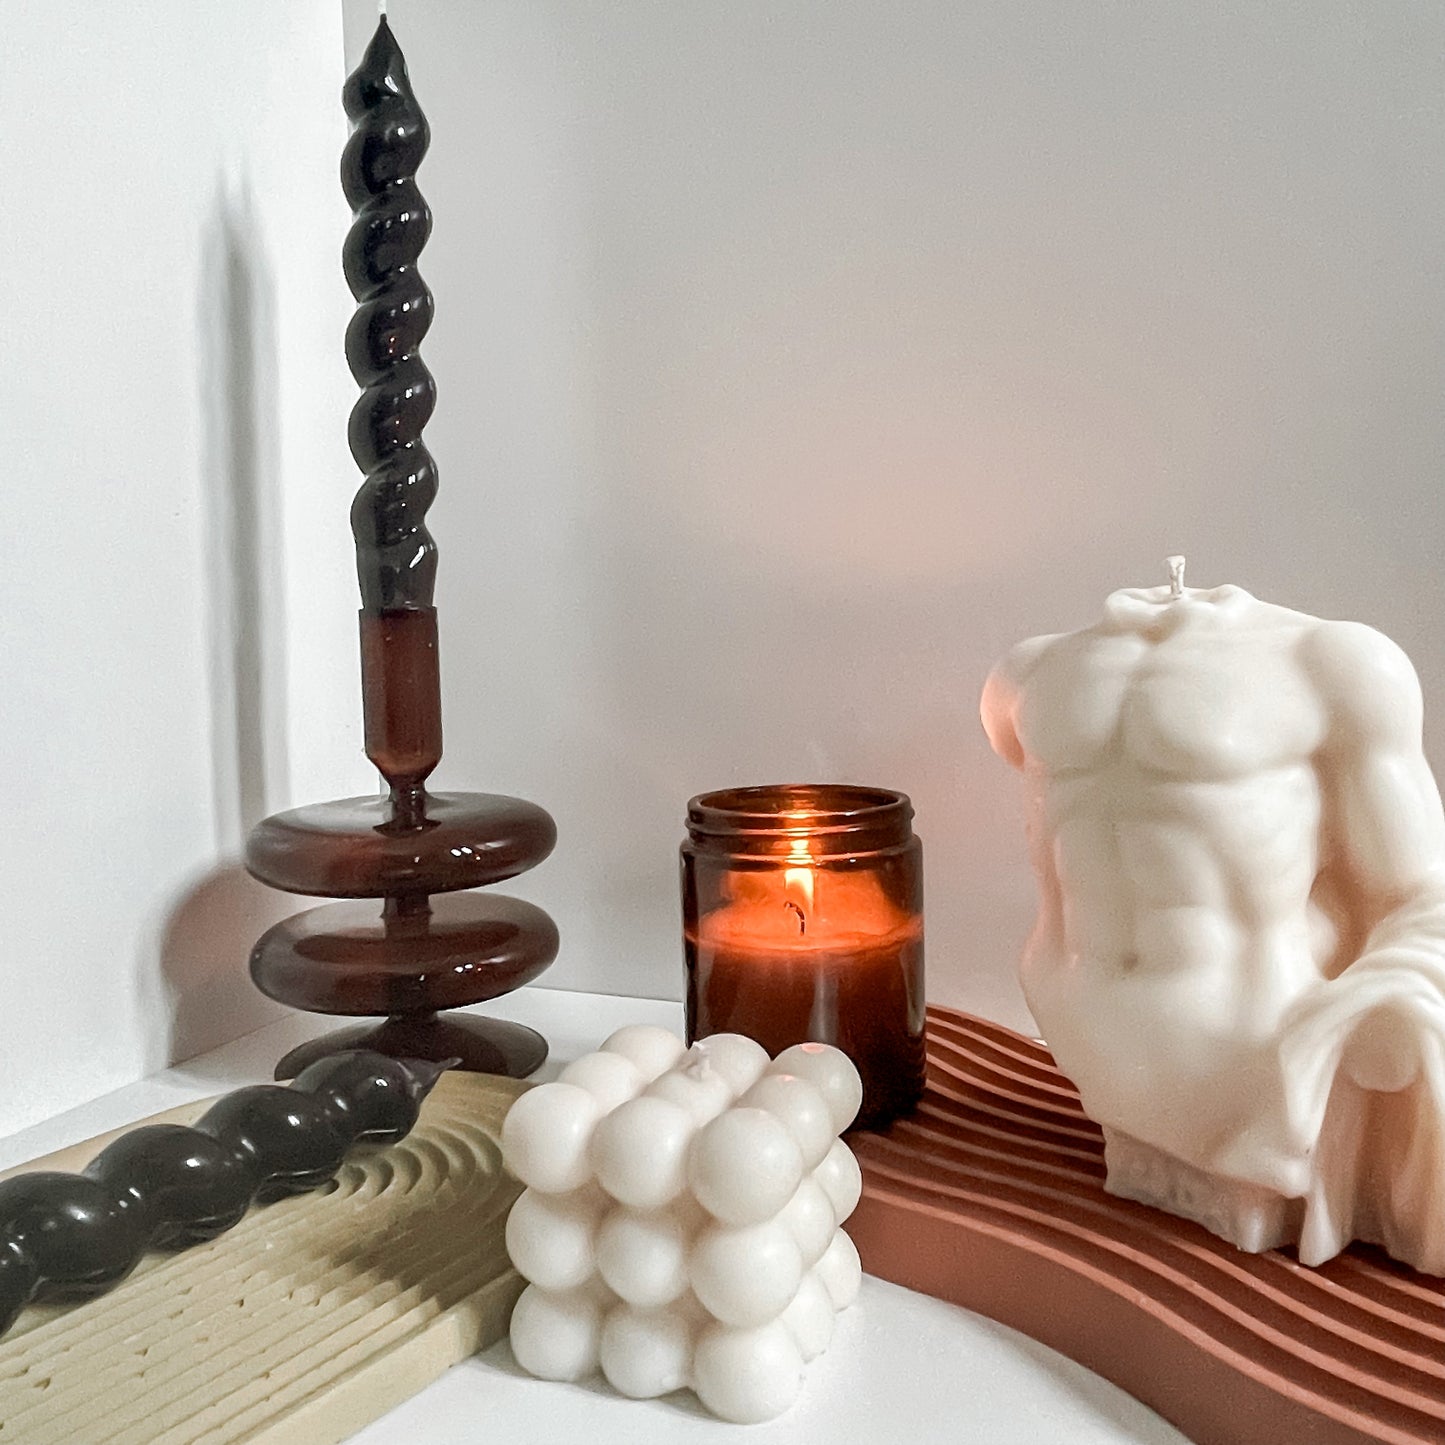 Twisted Glossy Black Soy Wax Candlestick